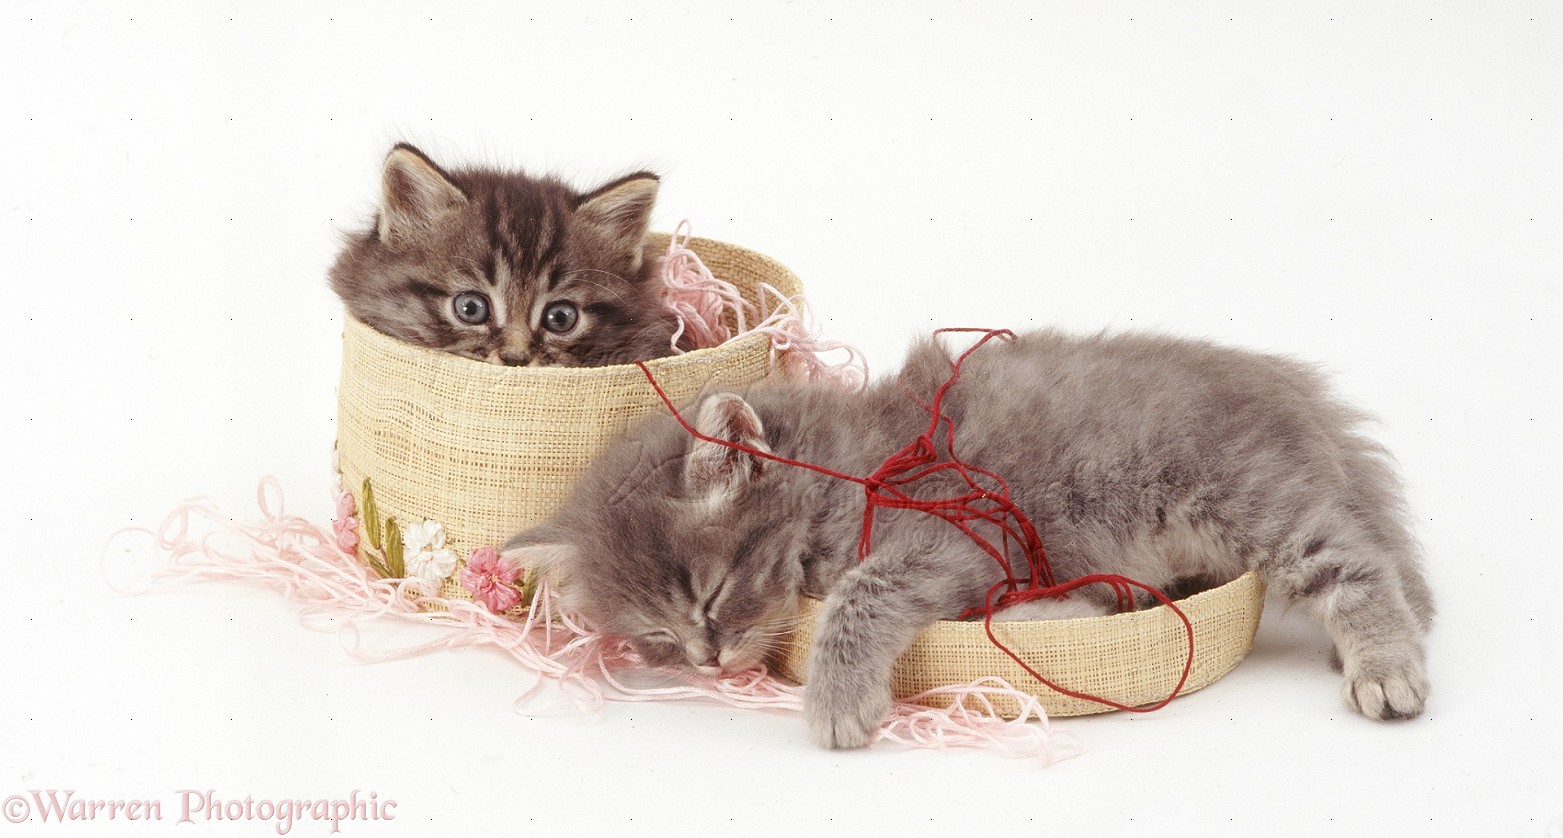 35429-Two-tabby-kittens-one-asleep-in-a-basket-of-wool-white-background.jpg